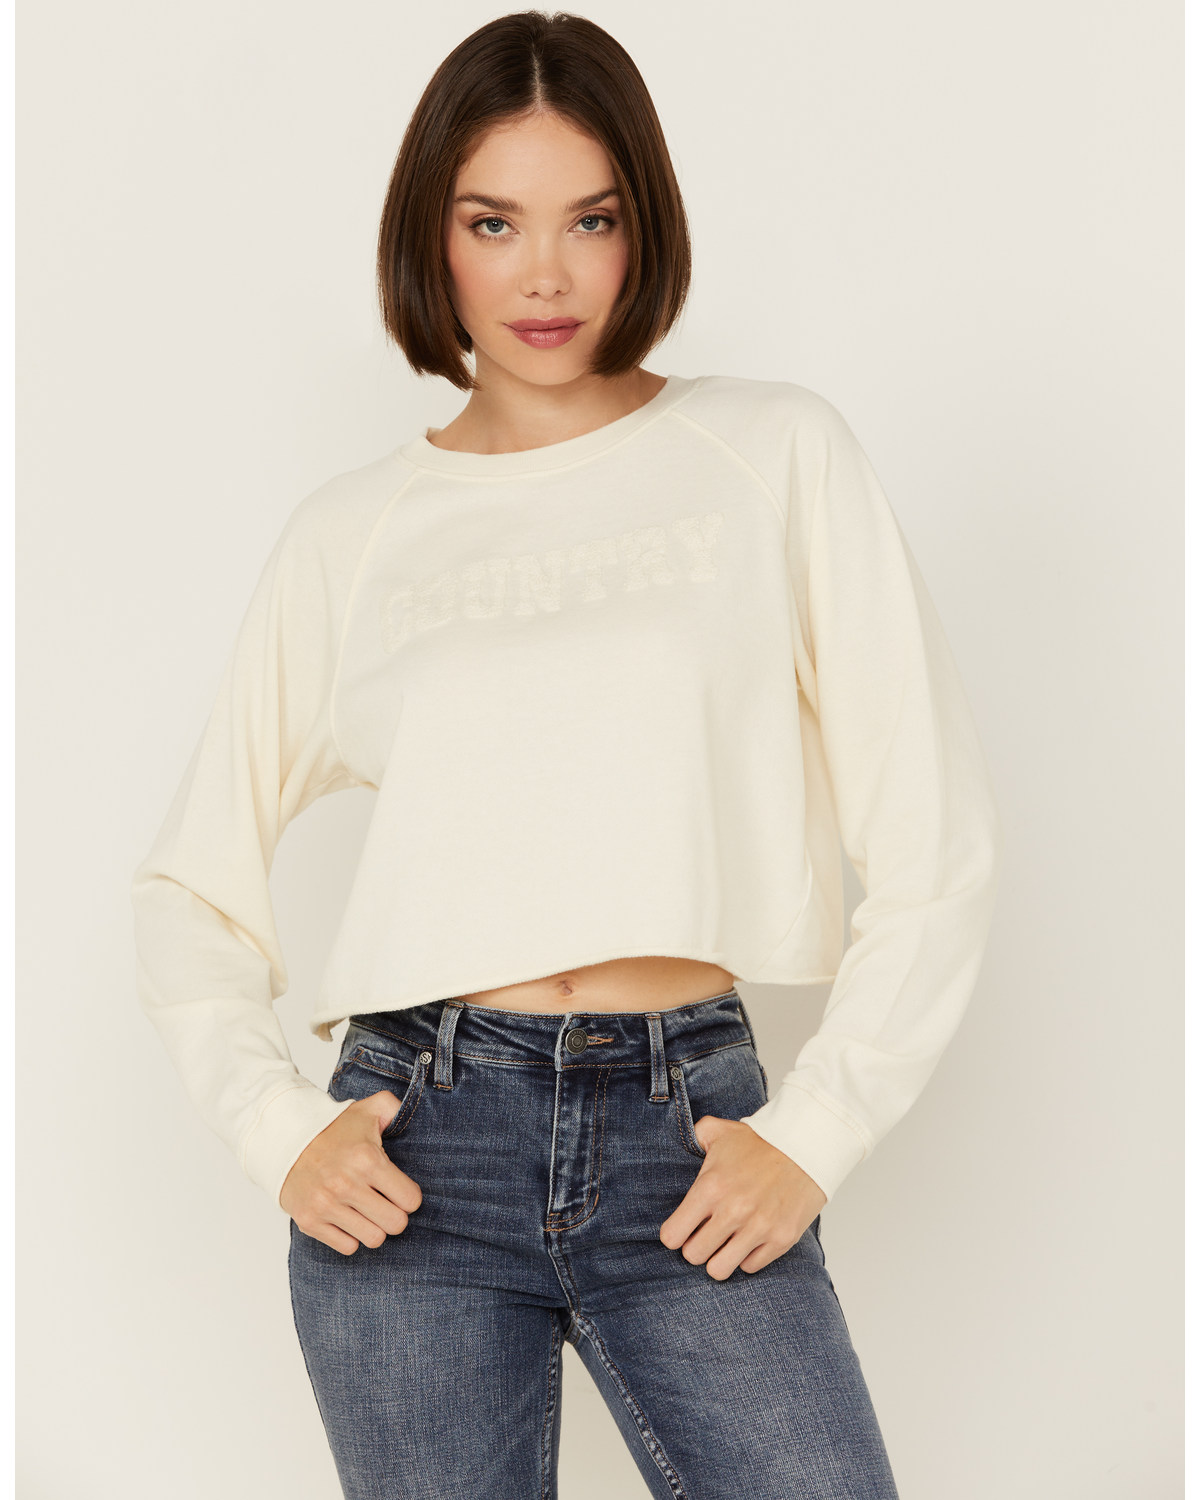 Cleo + Wolf Women's Asher Flocked Cropped Pullover